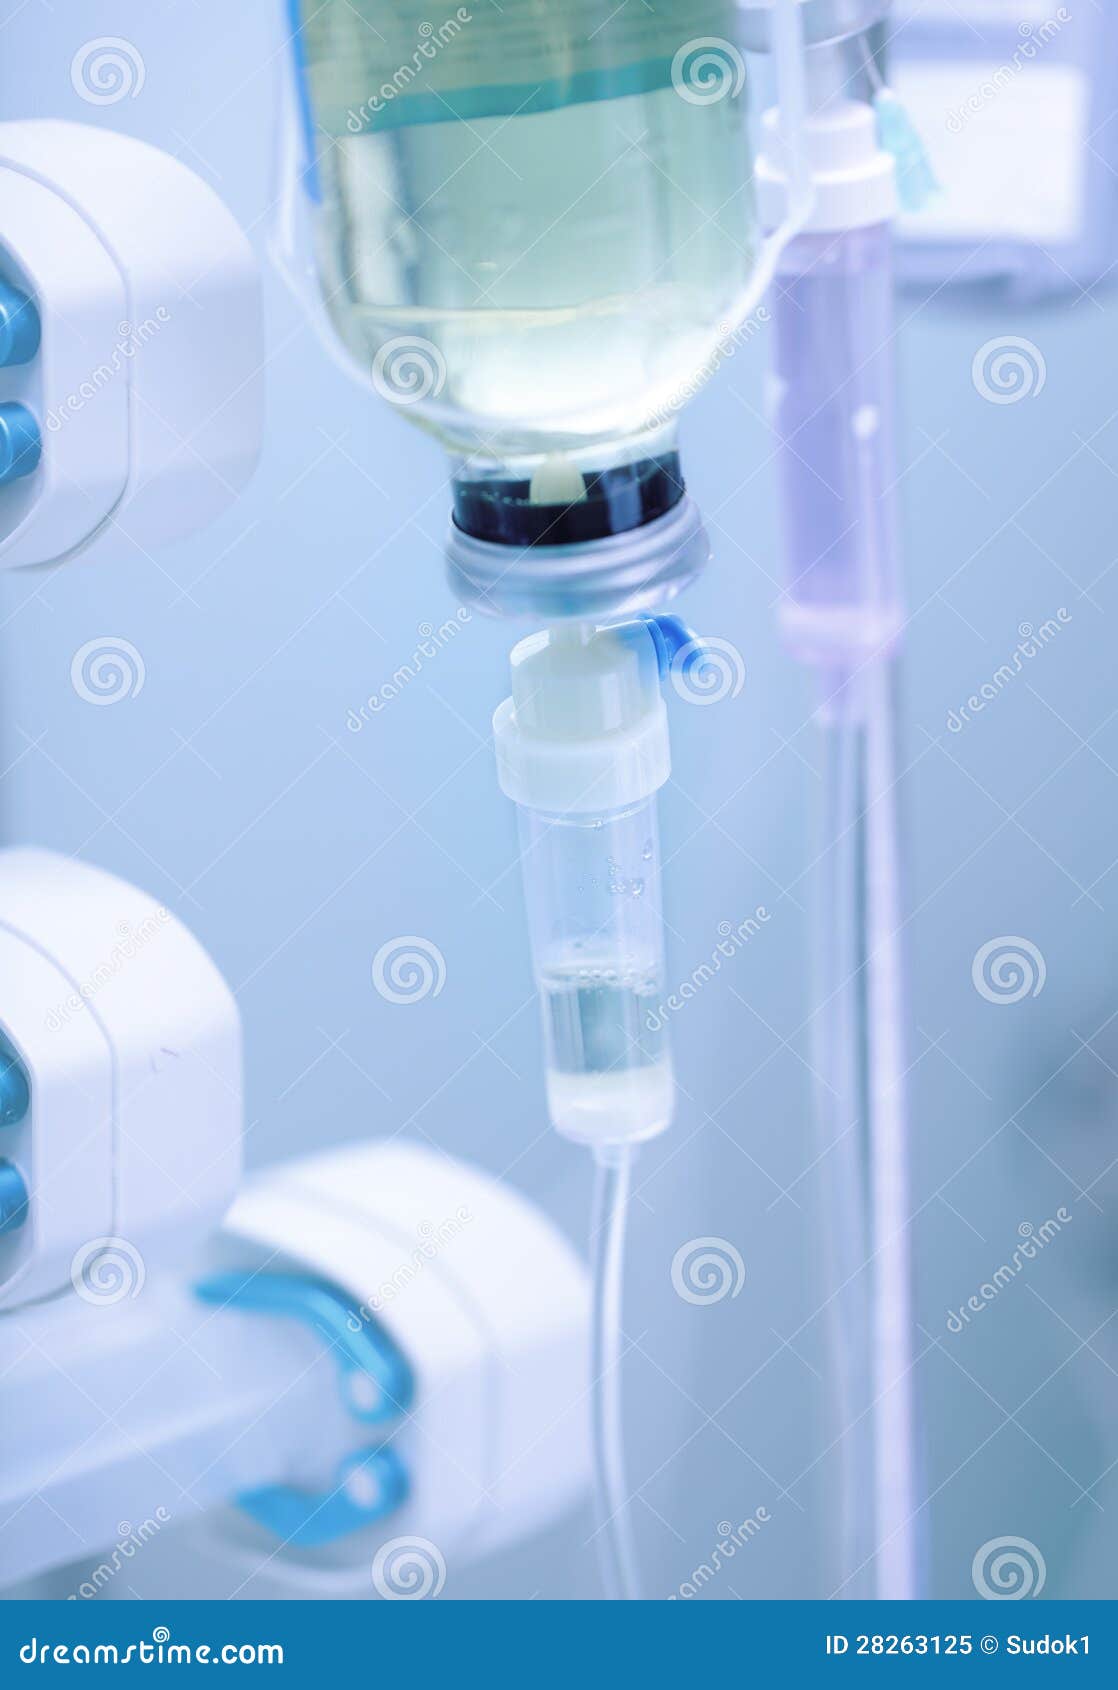 intravenous drip medication in the hospital.